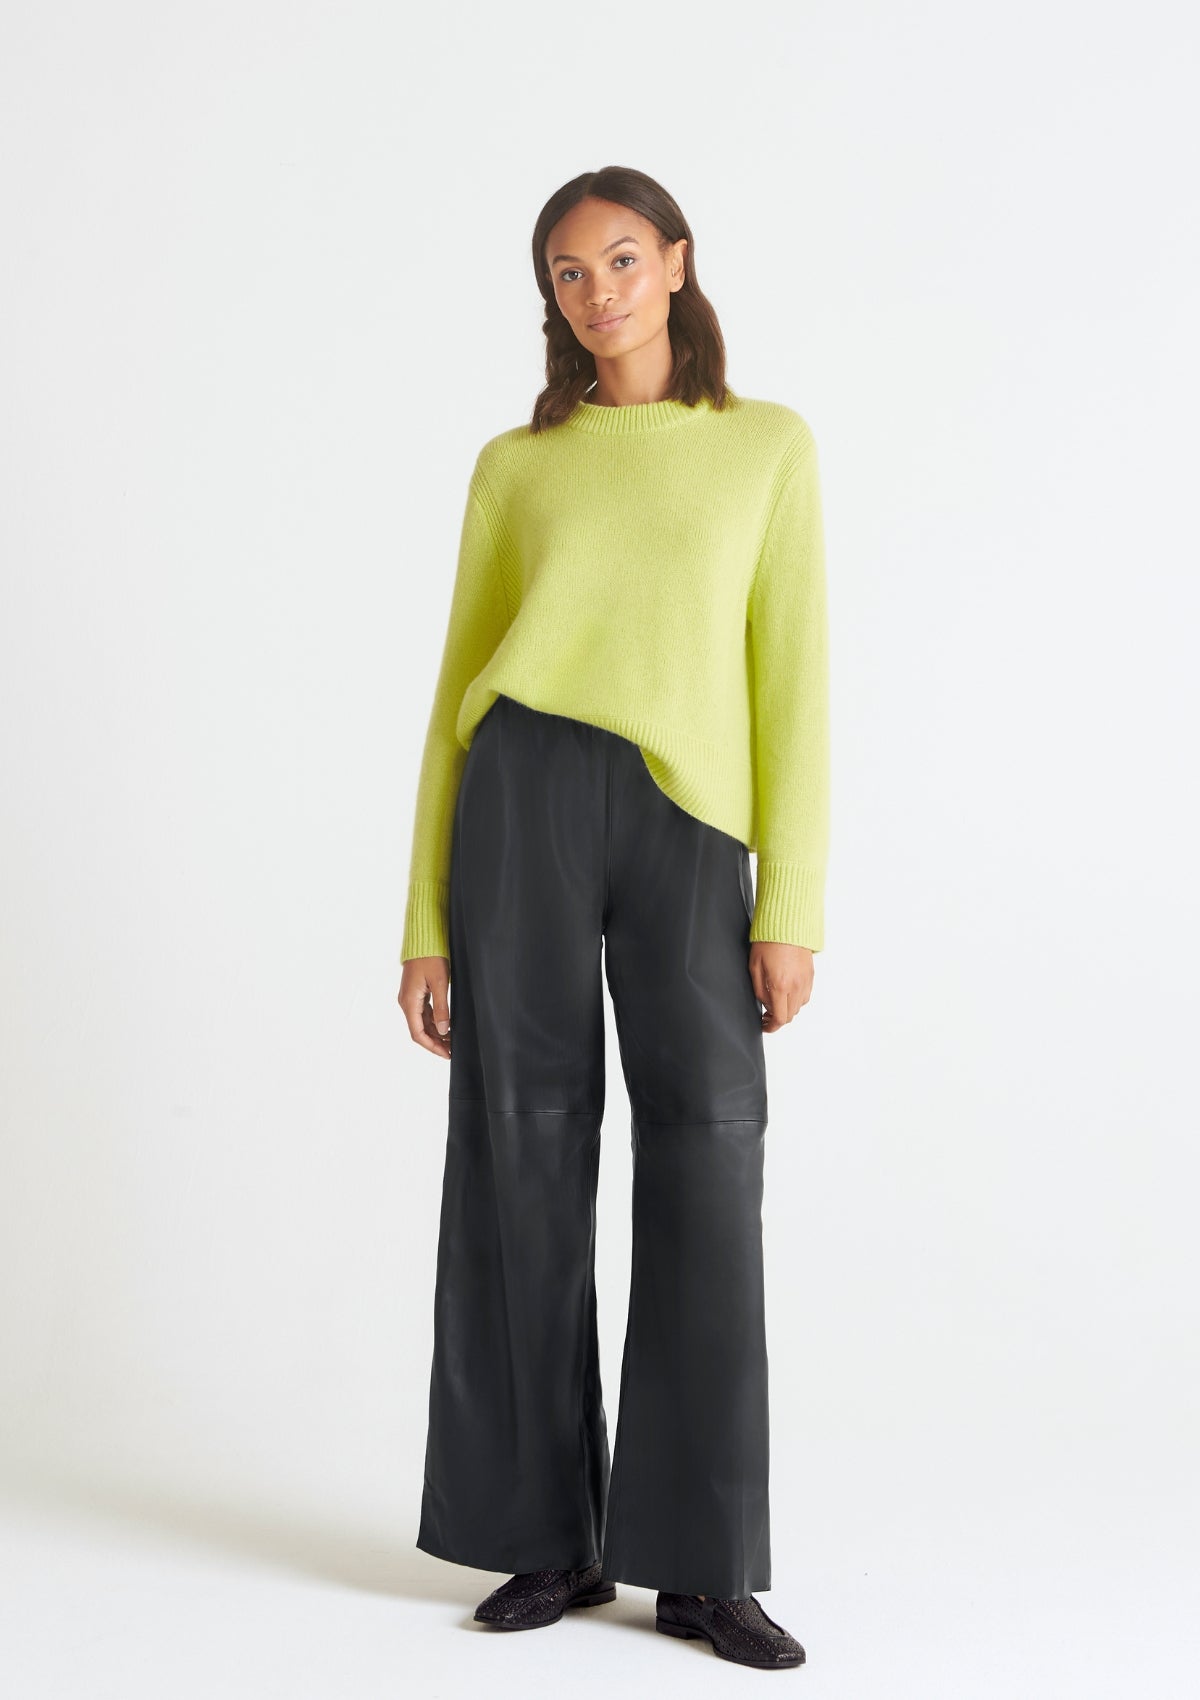 Cropped Cashmere Sweatshirt in Lime Green